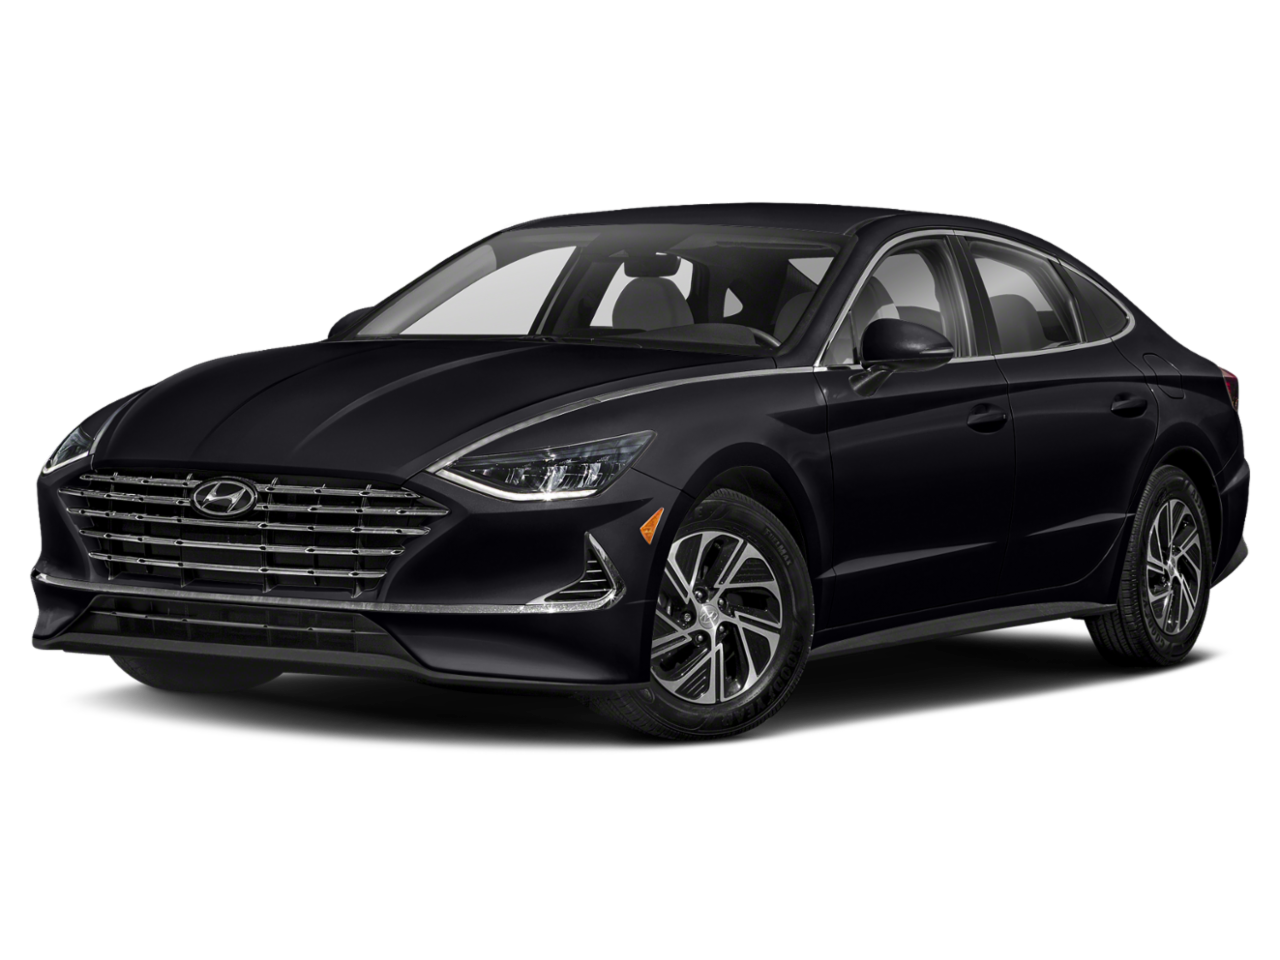 New from your Blue Springs MO dealership, McCarthy Blue Springs Hyundai.